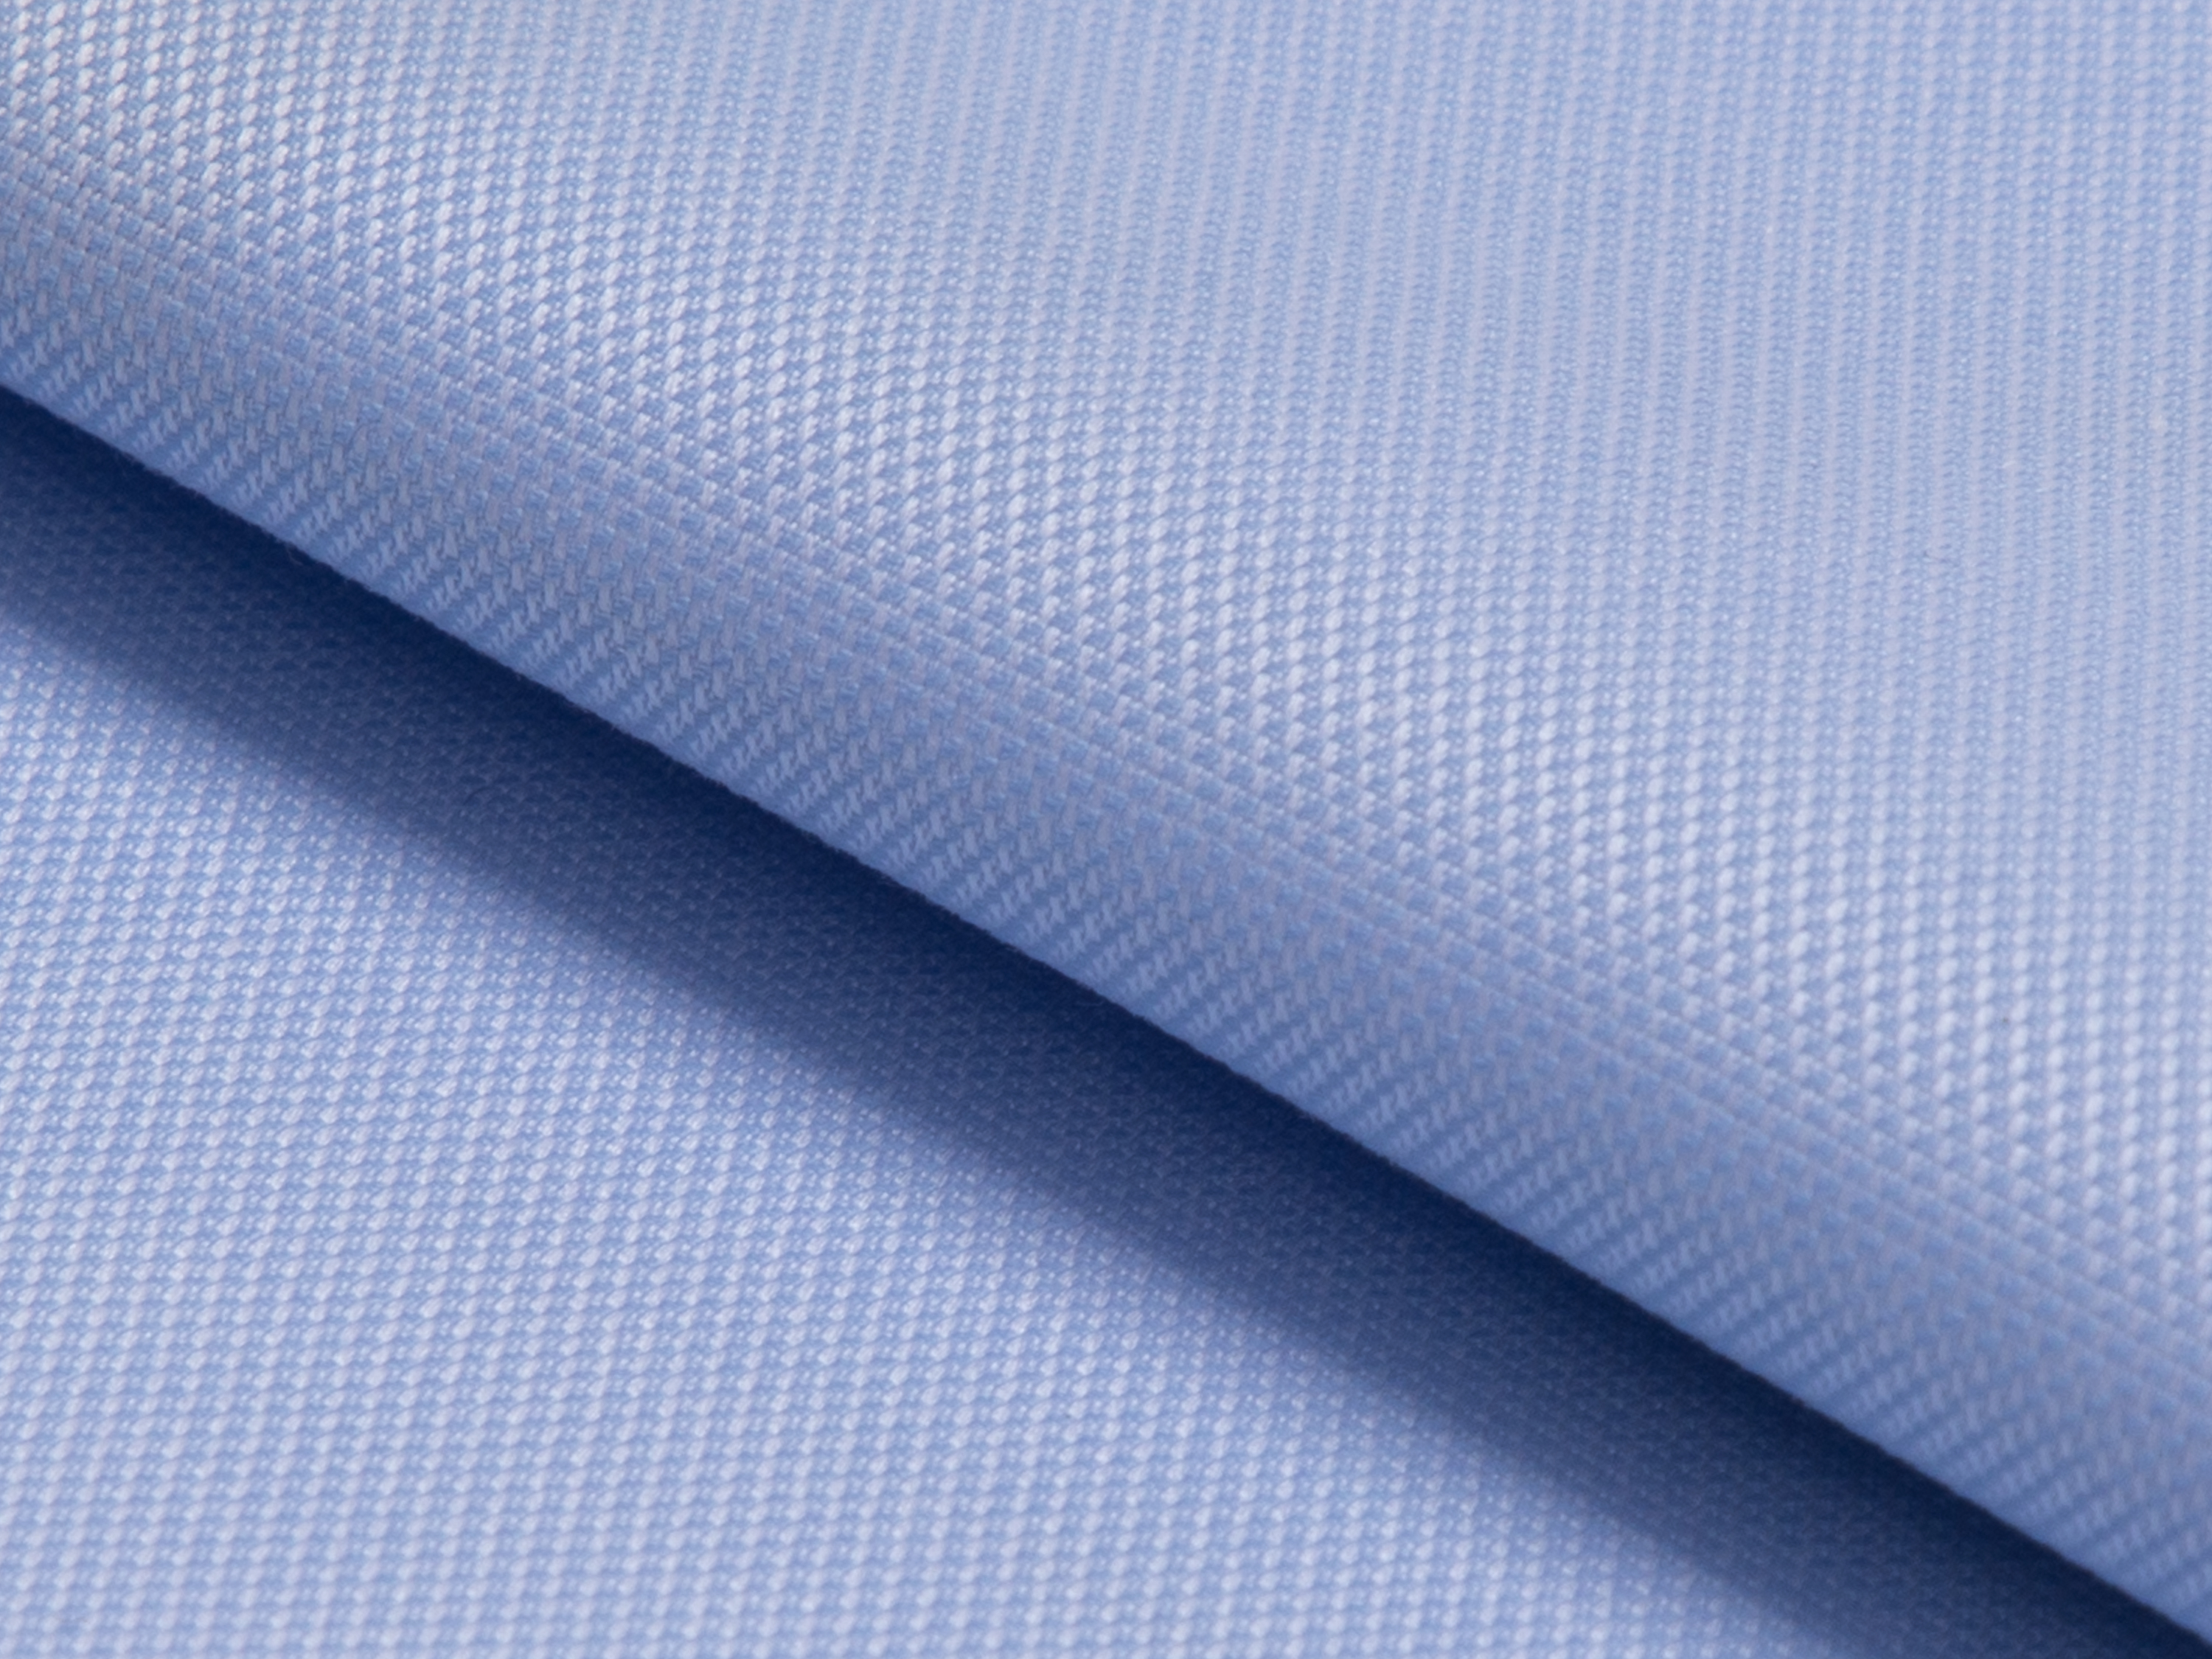 Buy tailor made shirts online - MAYFAIR - Pinpoint Light Blue